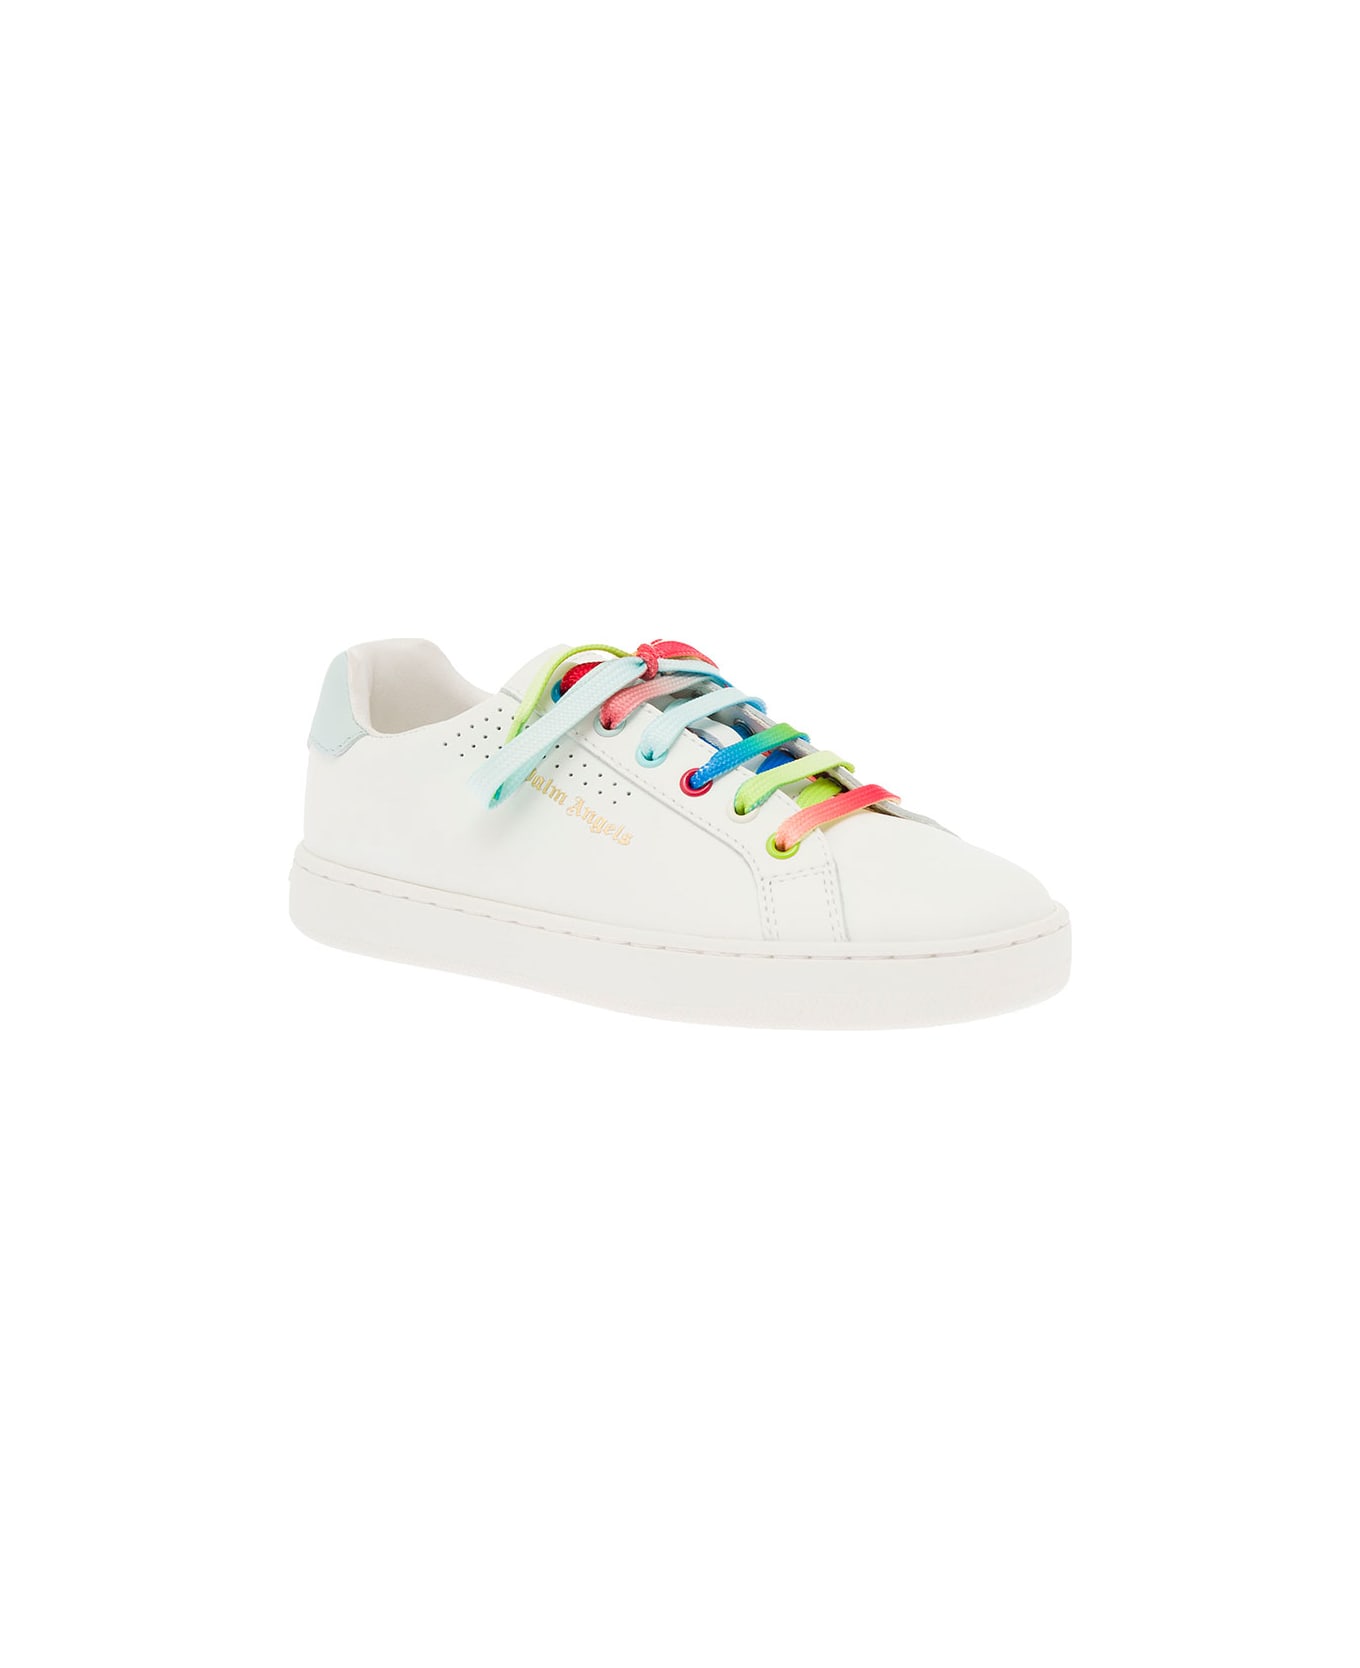 Palm Angels Kids Boy's White Leather Sneakers With Multicolor Laces - White